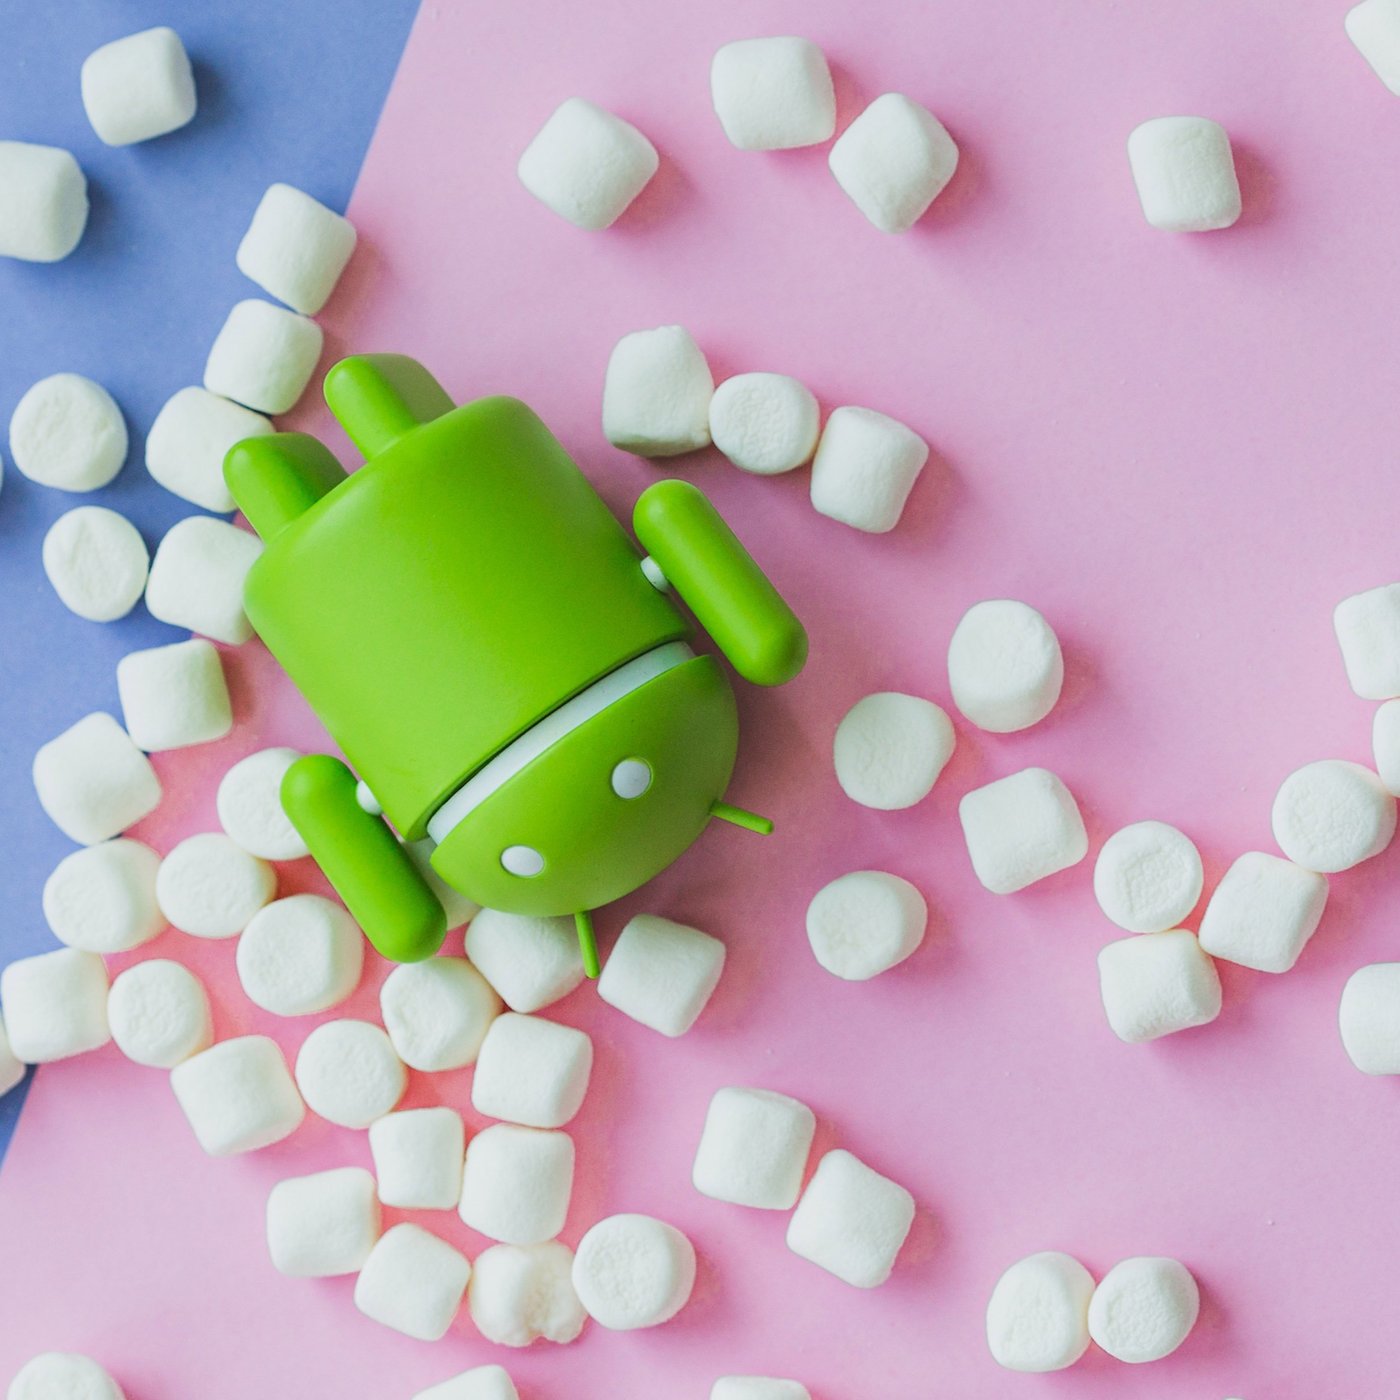 Android 6 Marshmallow Update Overview For Smartphones And Tablets Nextpit